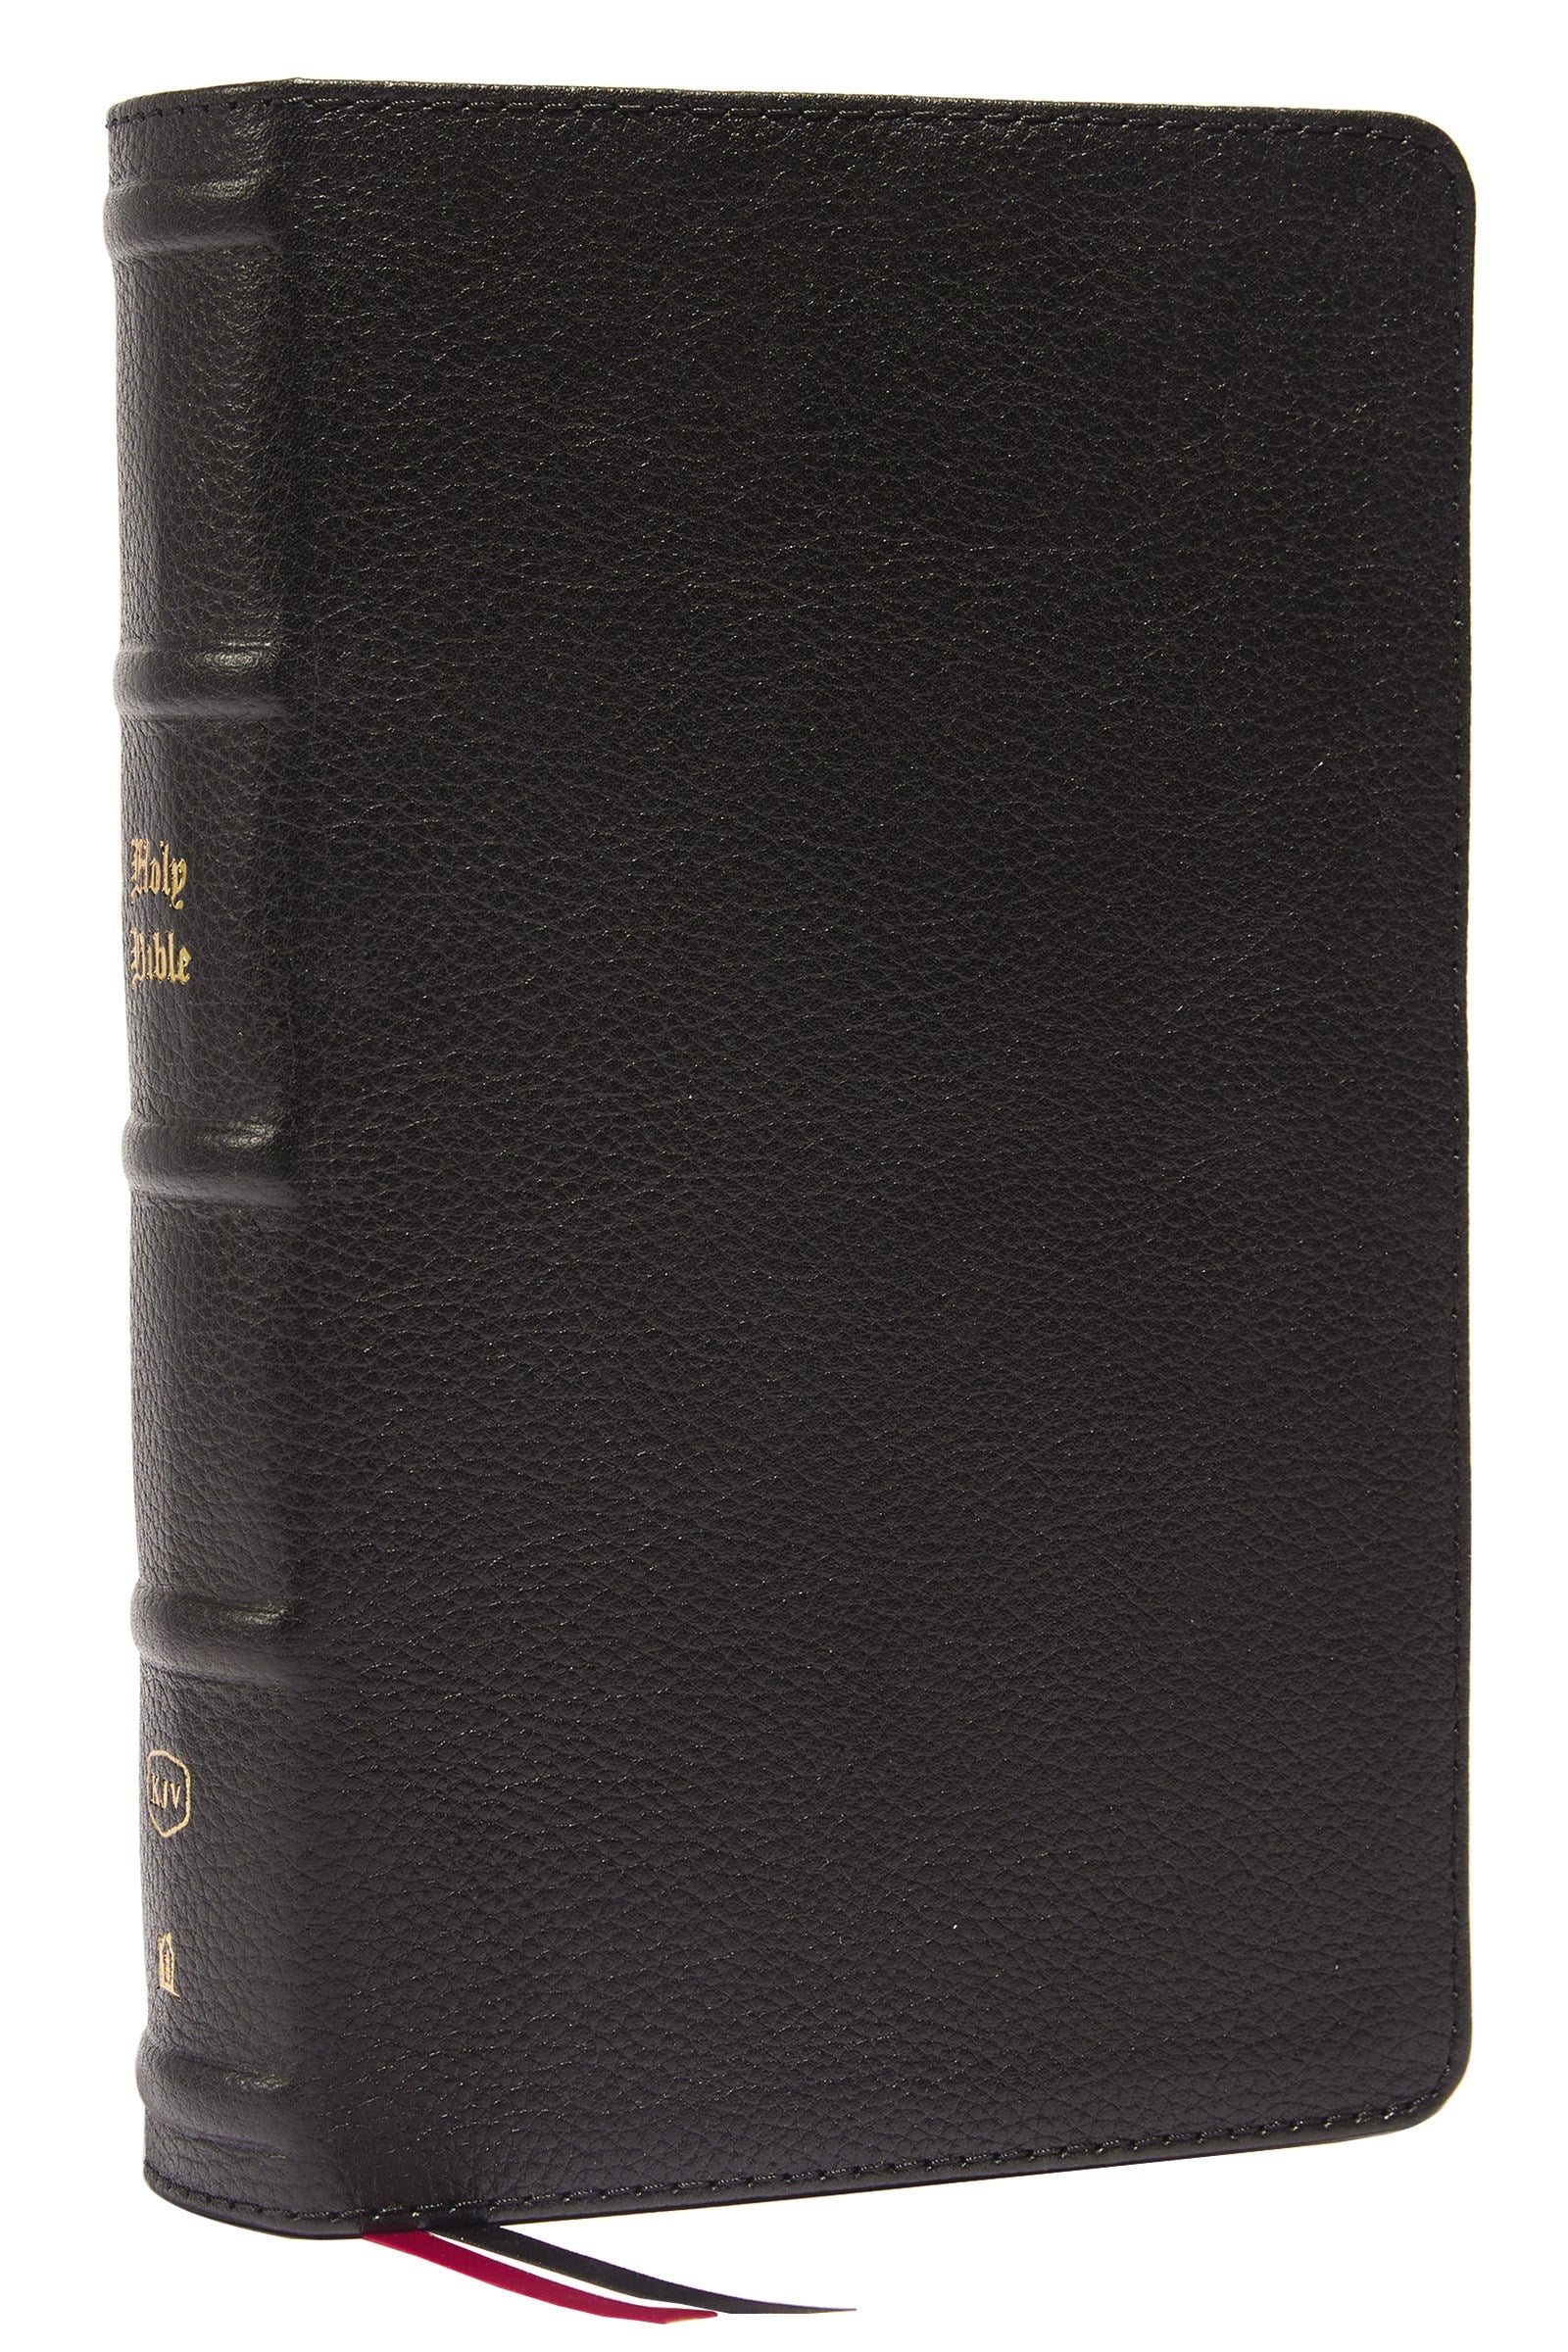 Seed of Abraham Christian Bookstore - (In)Courage - KJV Personal Size Large Print Single-Column Reference Bible (Comfort Print)-Black Genuine Leather